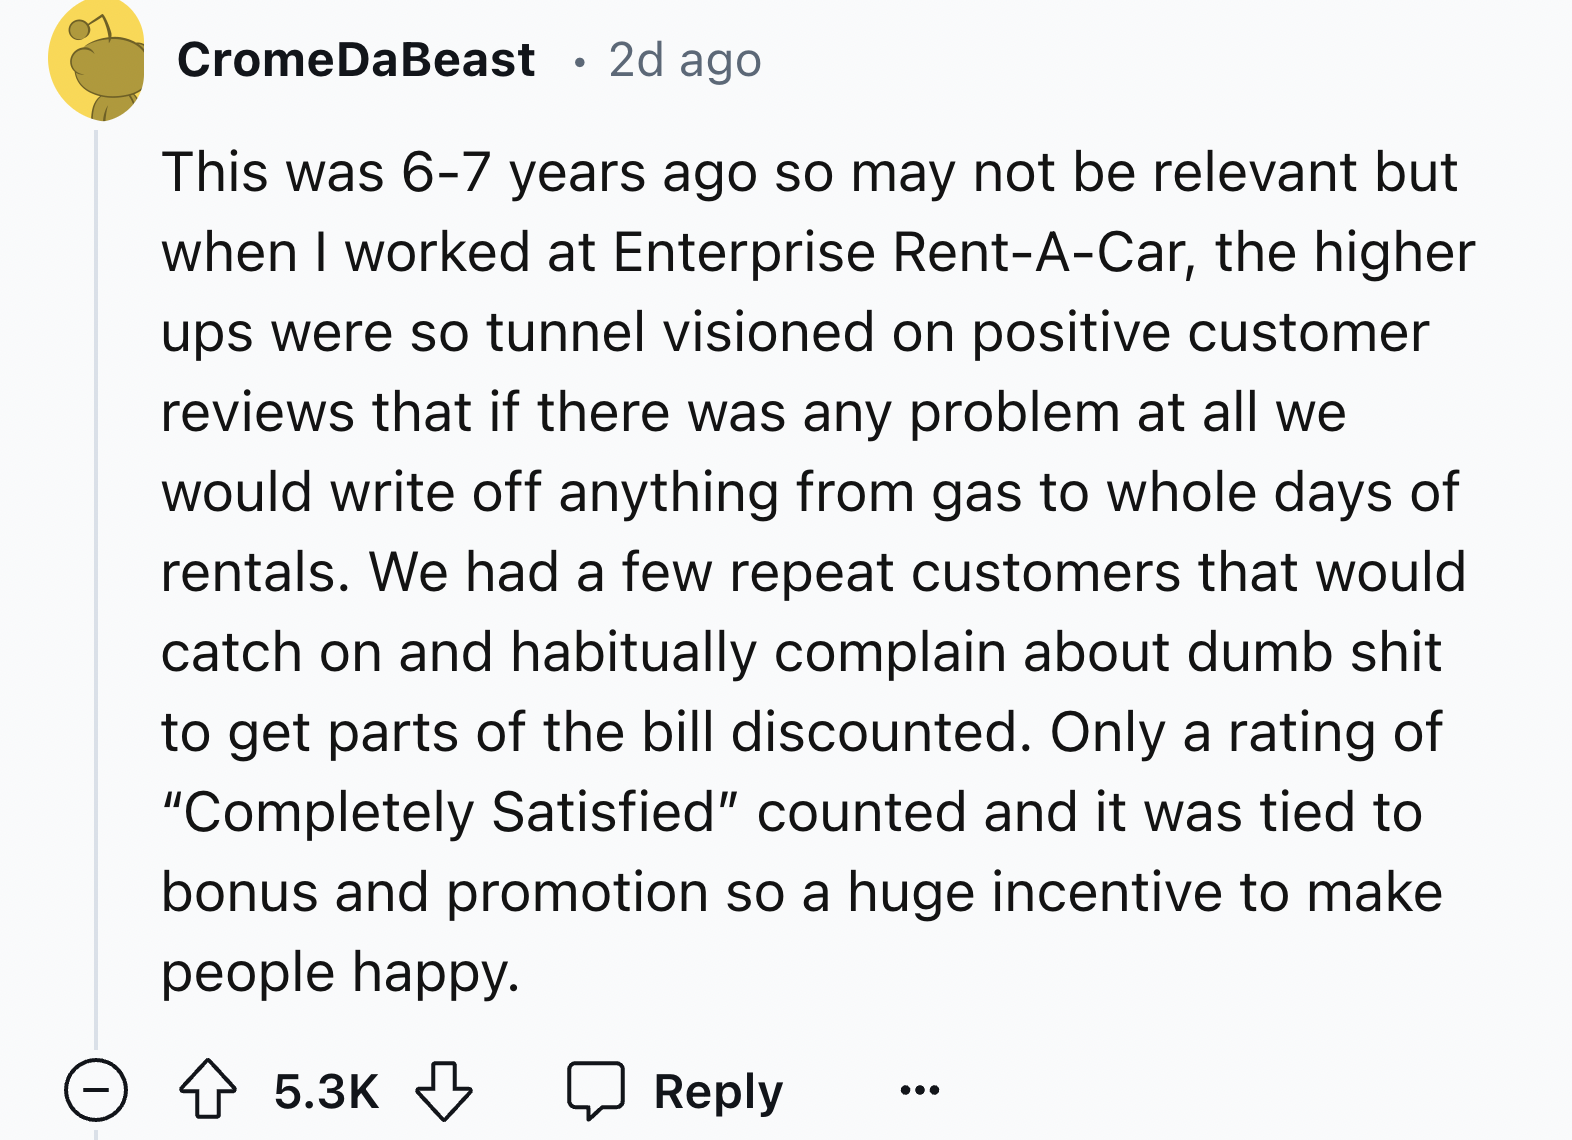 screenshot - CromeDaBeast 2d ago This was 67 years ago so may not be relevant but when I worked at Enterprise RentACar, the higher ups were so tunnel visioned on positive customer reviews that if there was any problem at all we would write off anything fr